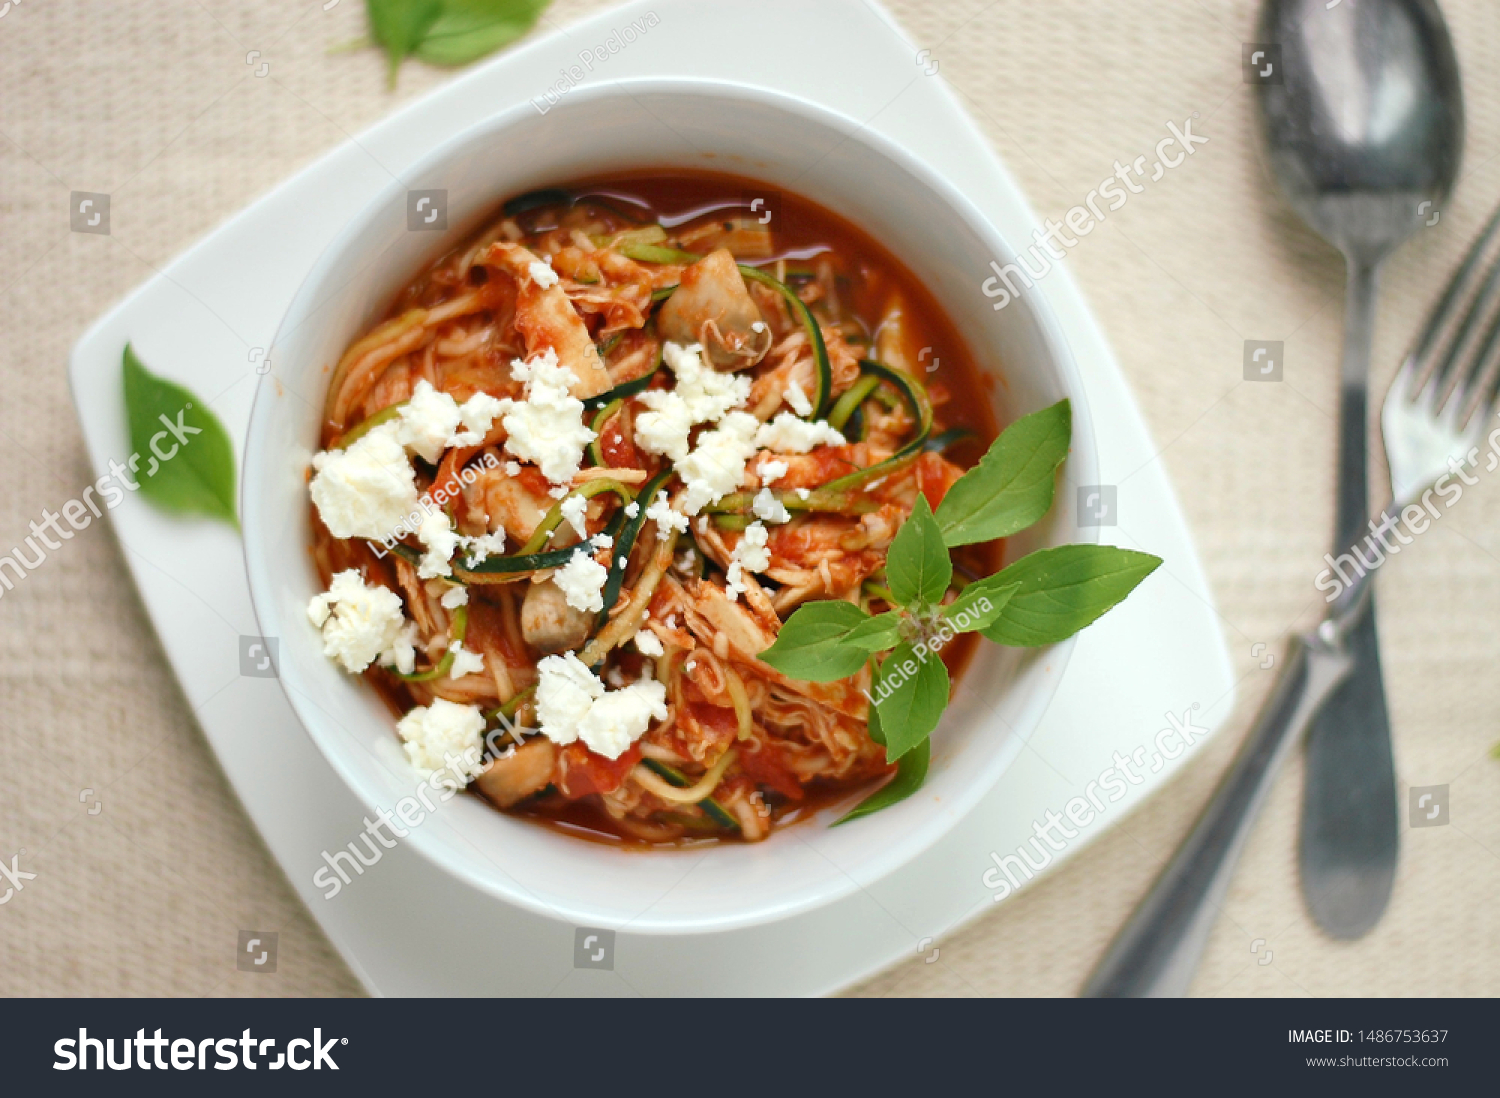 Zucchini spaghetti in sauce with tomato, basil, meat and cheese #1486753637